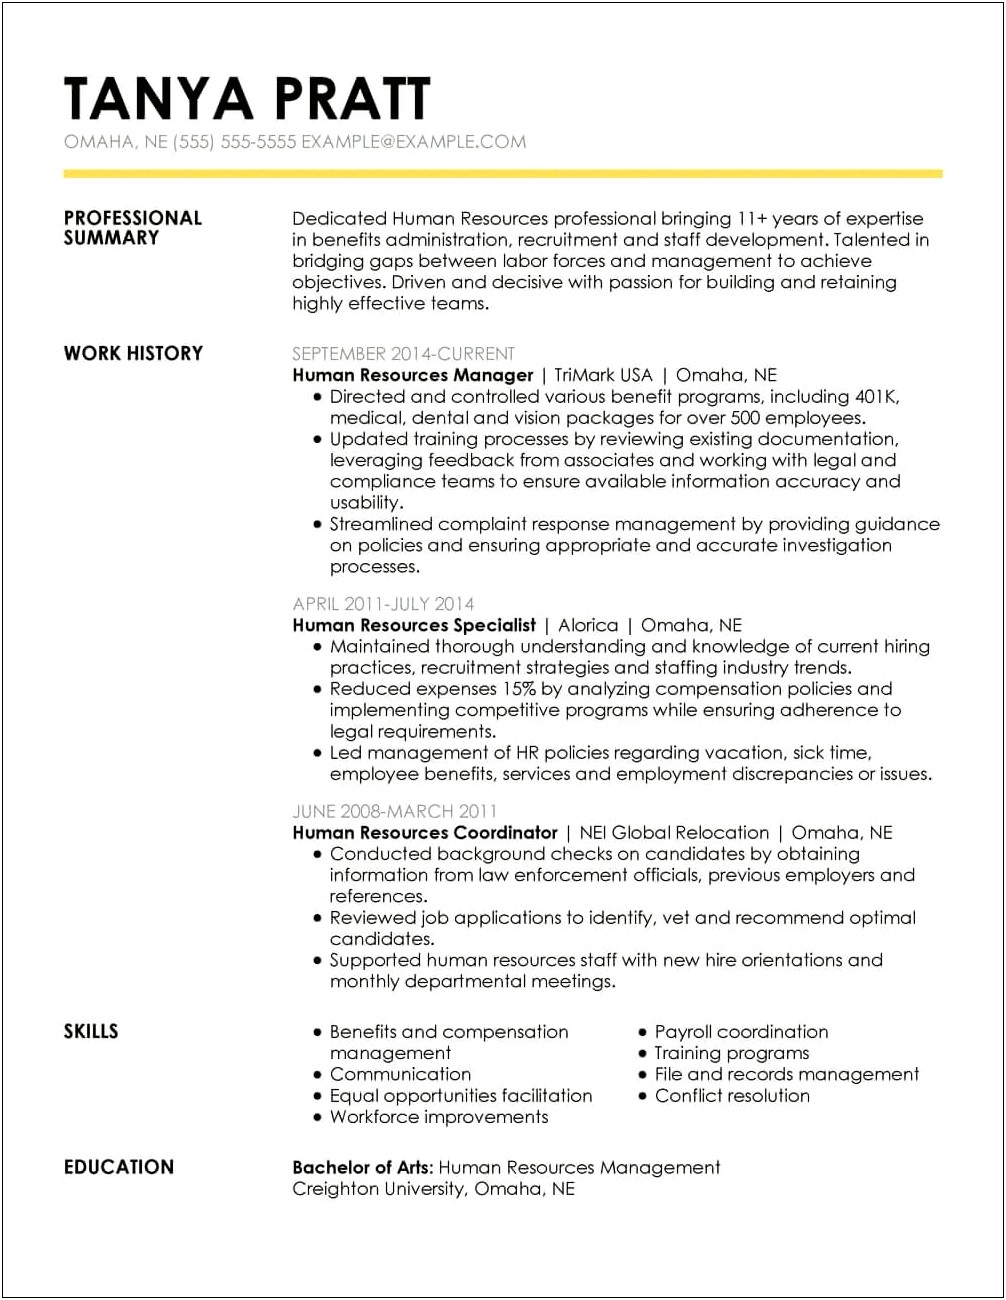 Employee Relations Manager Sensuring Compliance Resume